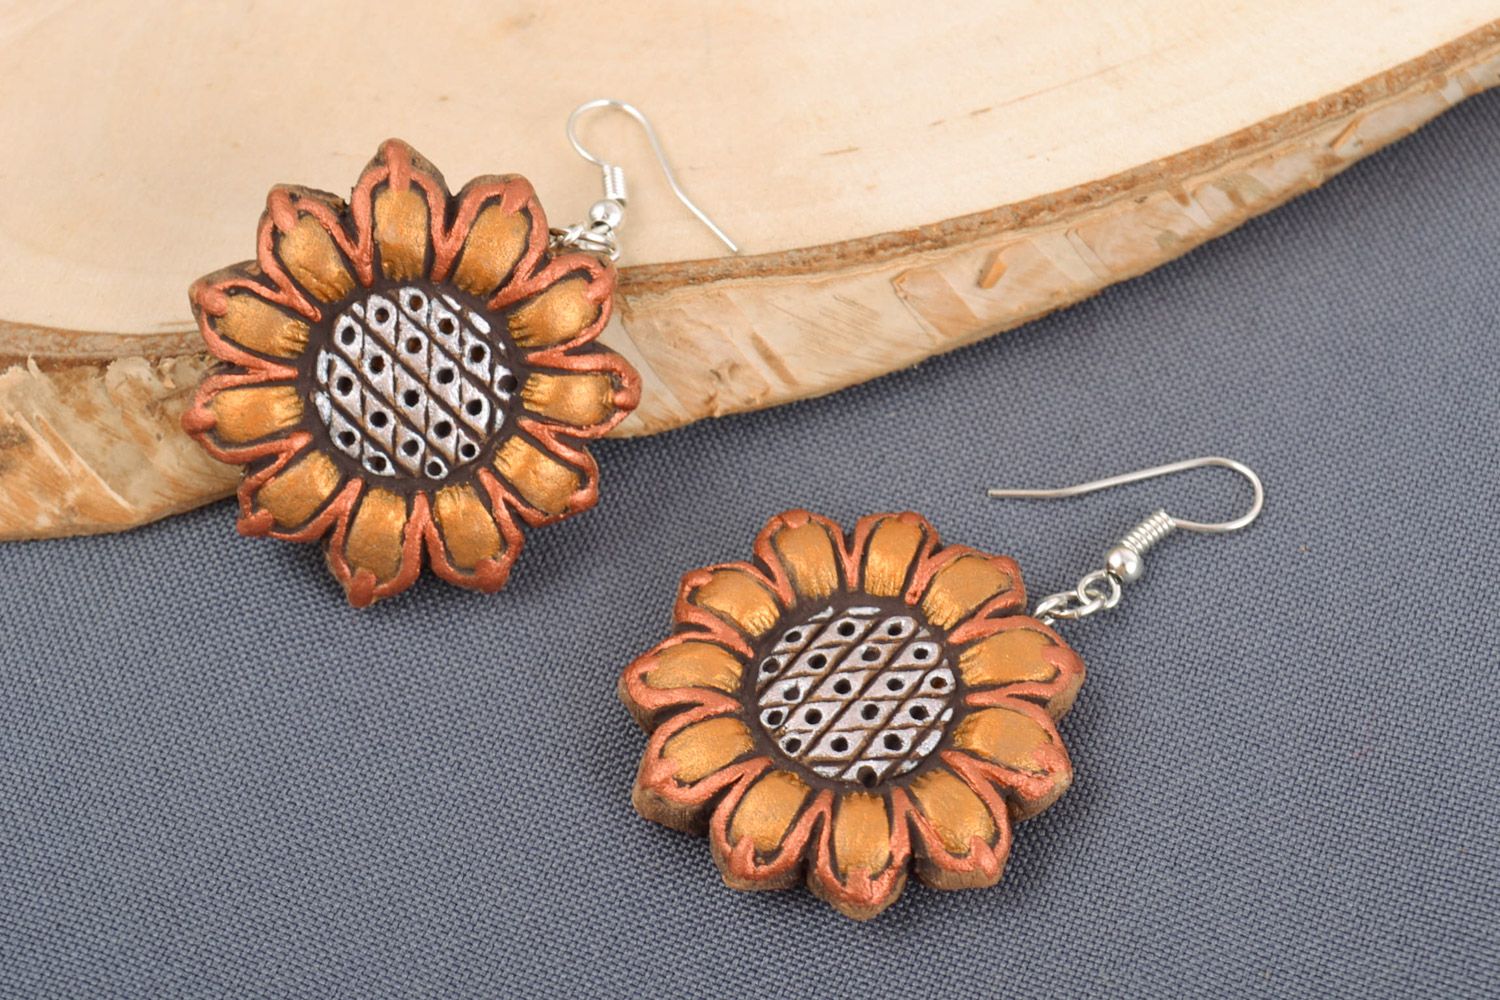 Handmade round clay flower earrings in the shape of sunflowers painted with acrylics photo 1